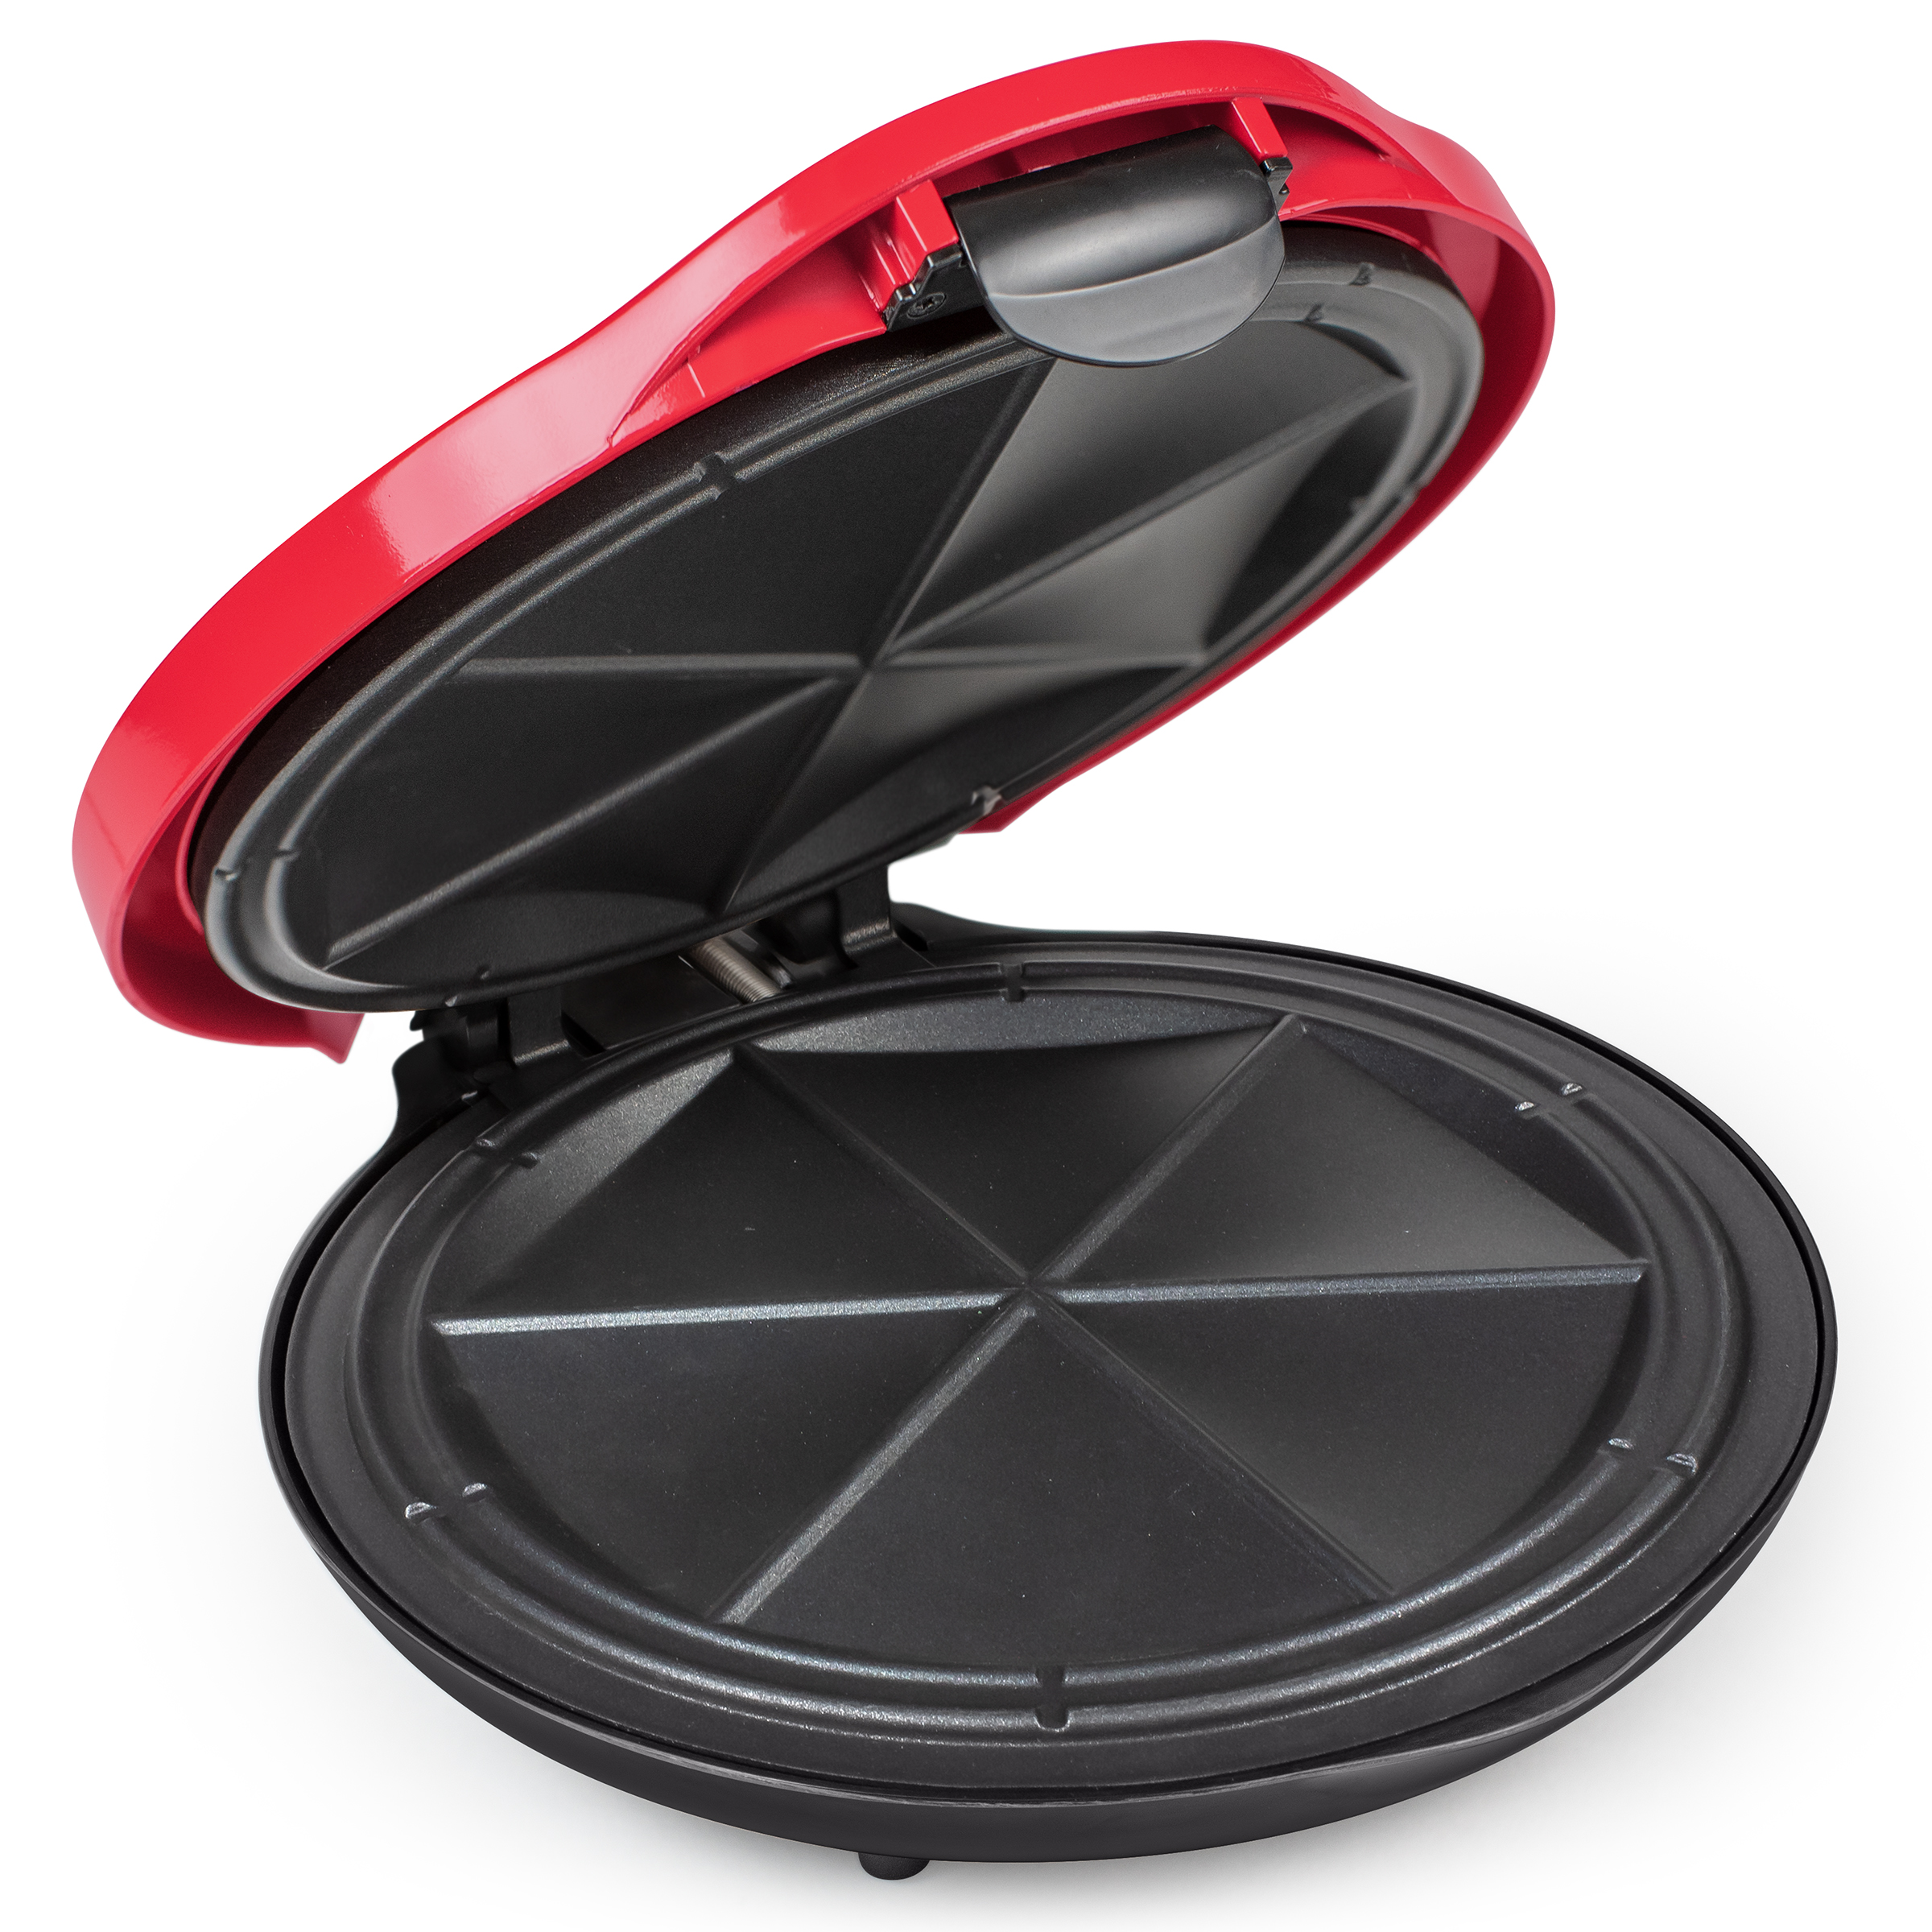 Taco Tuesday 6-Wedge Electric Quesadilla Maker with Extra Stuffing Latch, Red 10” - image 2 of 6